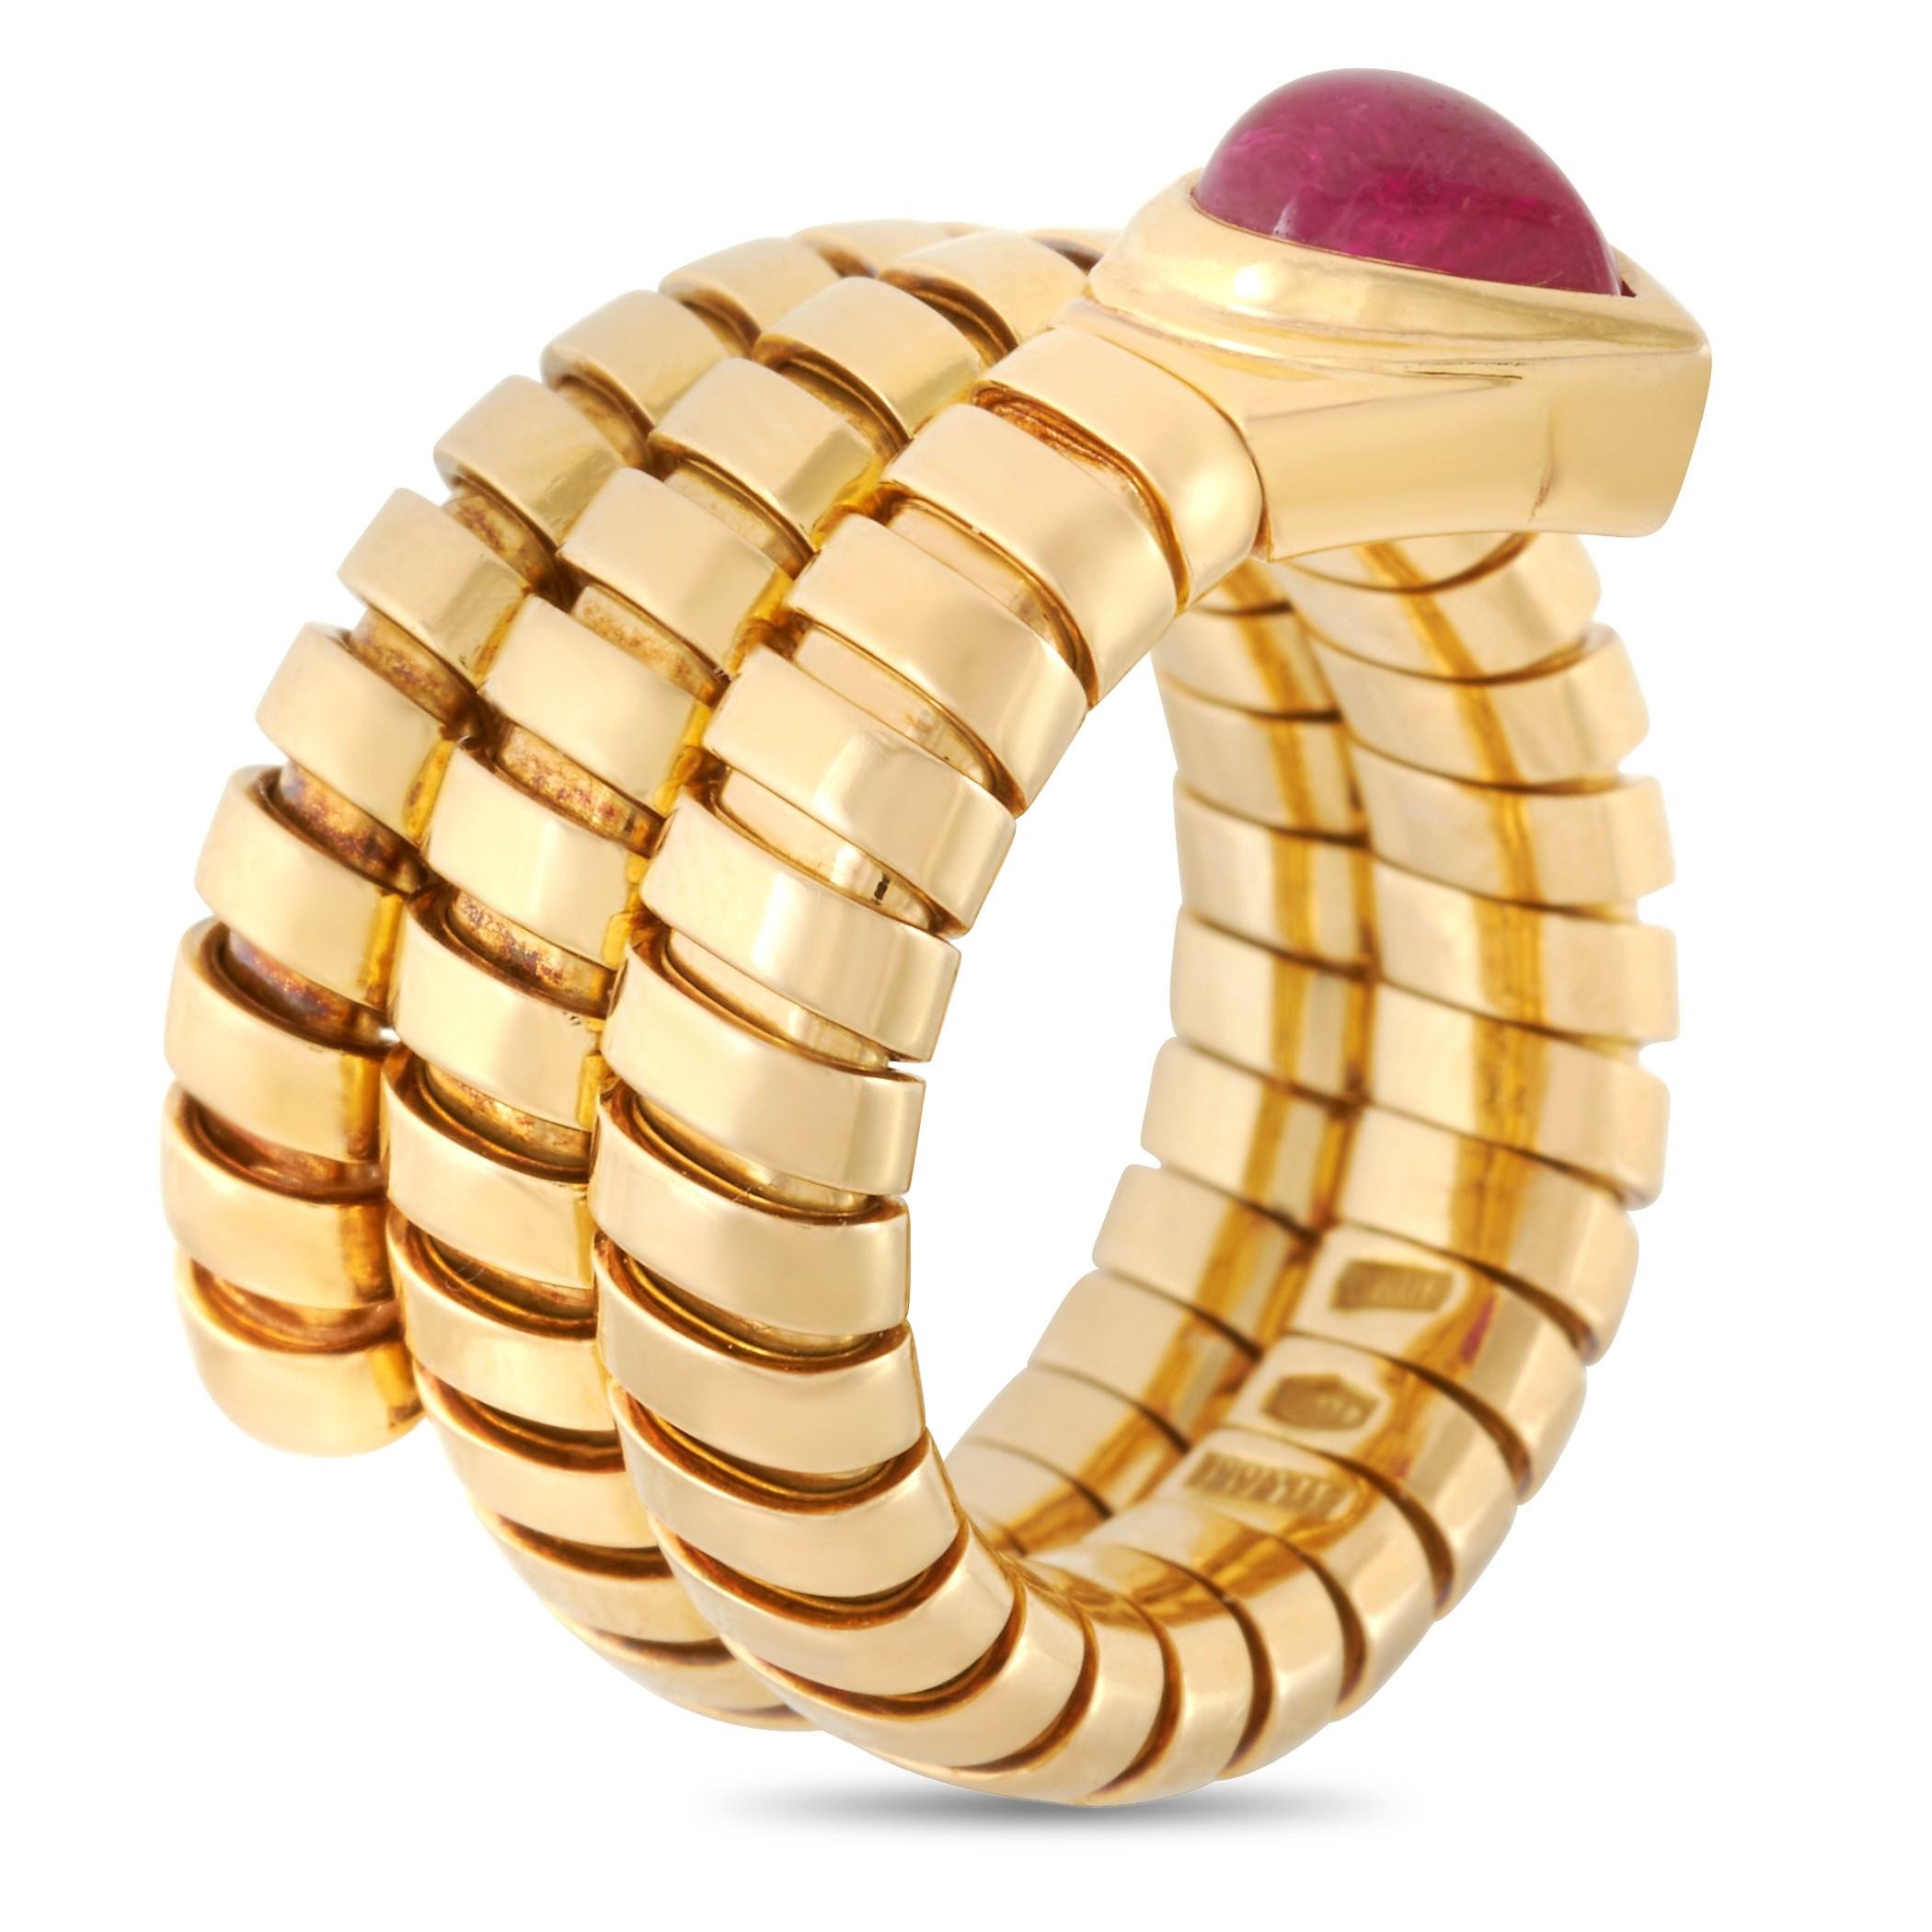 This Serpenti ring from BVLGARI is an extravagant piece that coils the contemporary soul of tubogas with the sinuosity of the snake. Depicting both the fluid shape of the serpent and the sensual curves of a woman, this ring has a tubular and